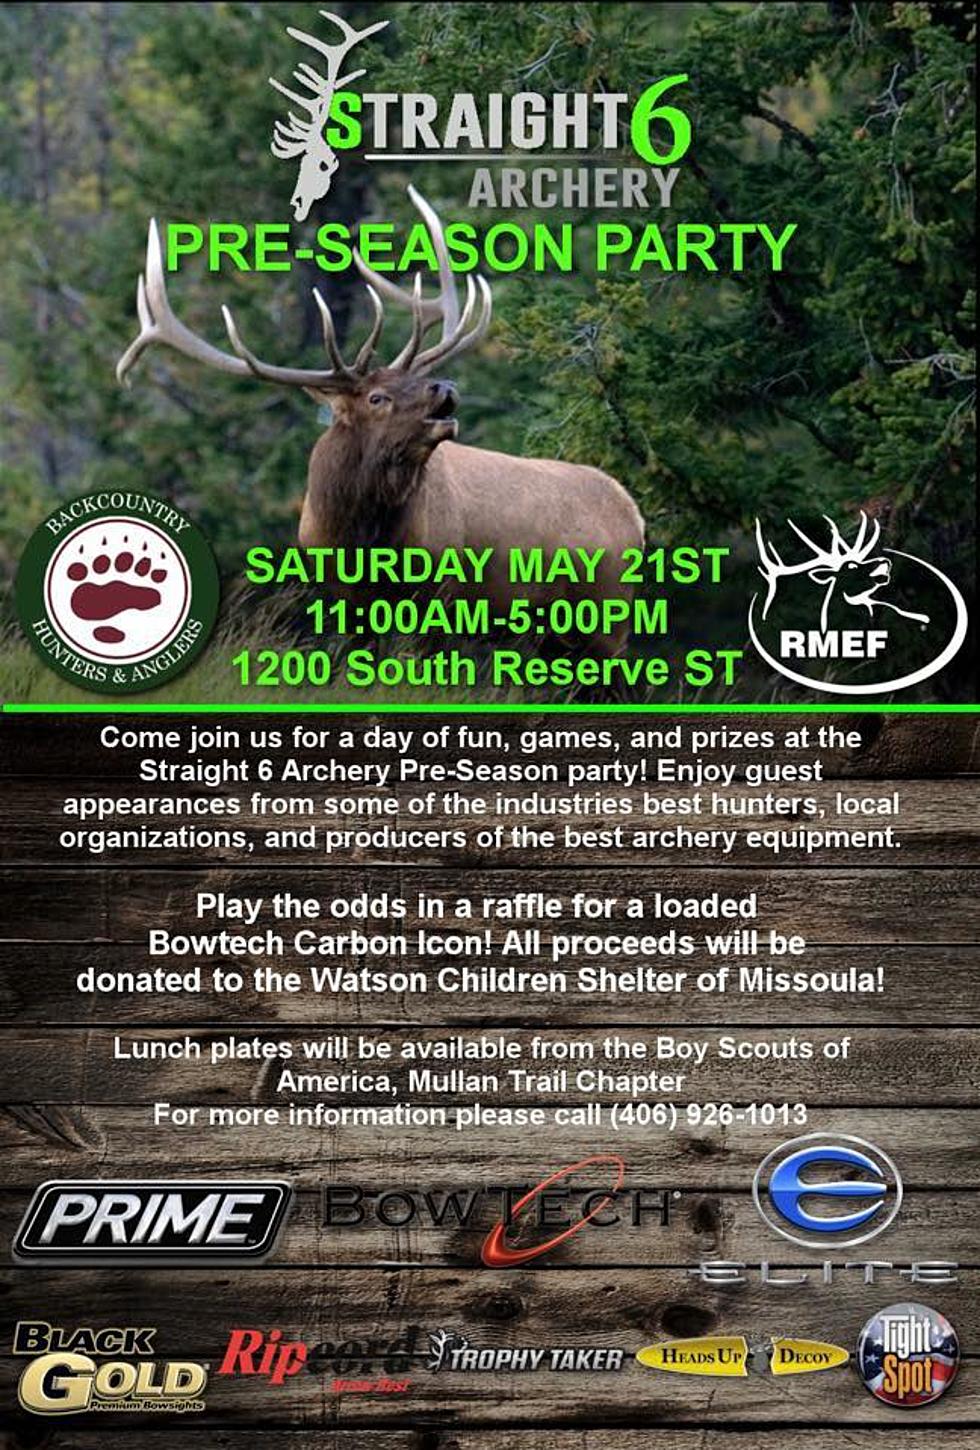 Straight 6 Archery Pre-Season Party this Weekend in Missoula